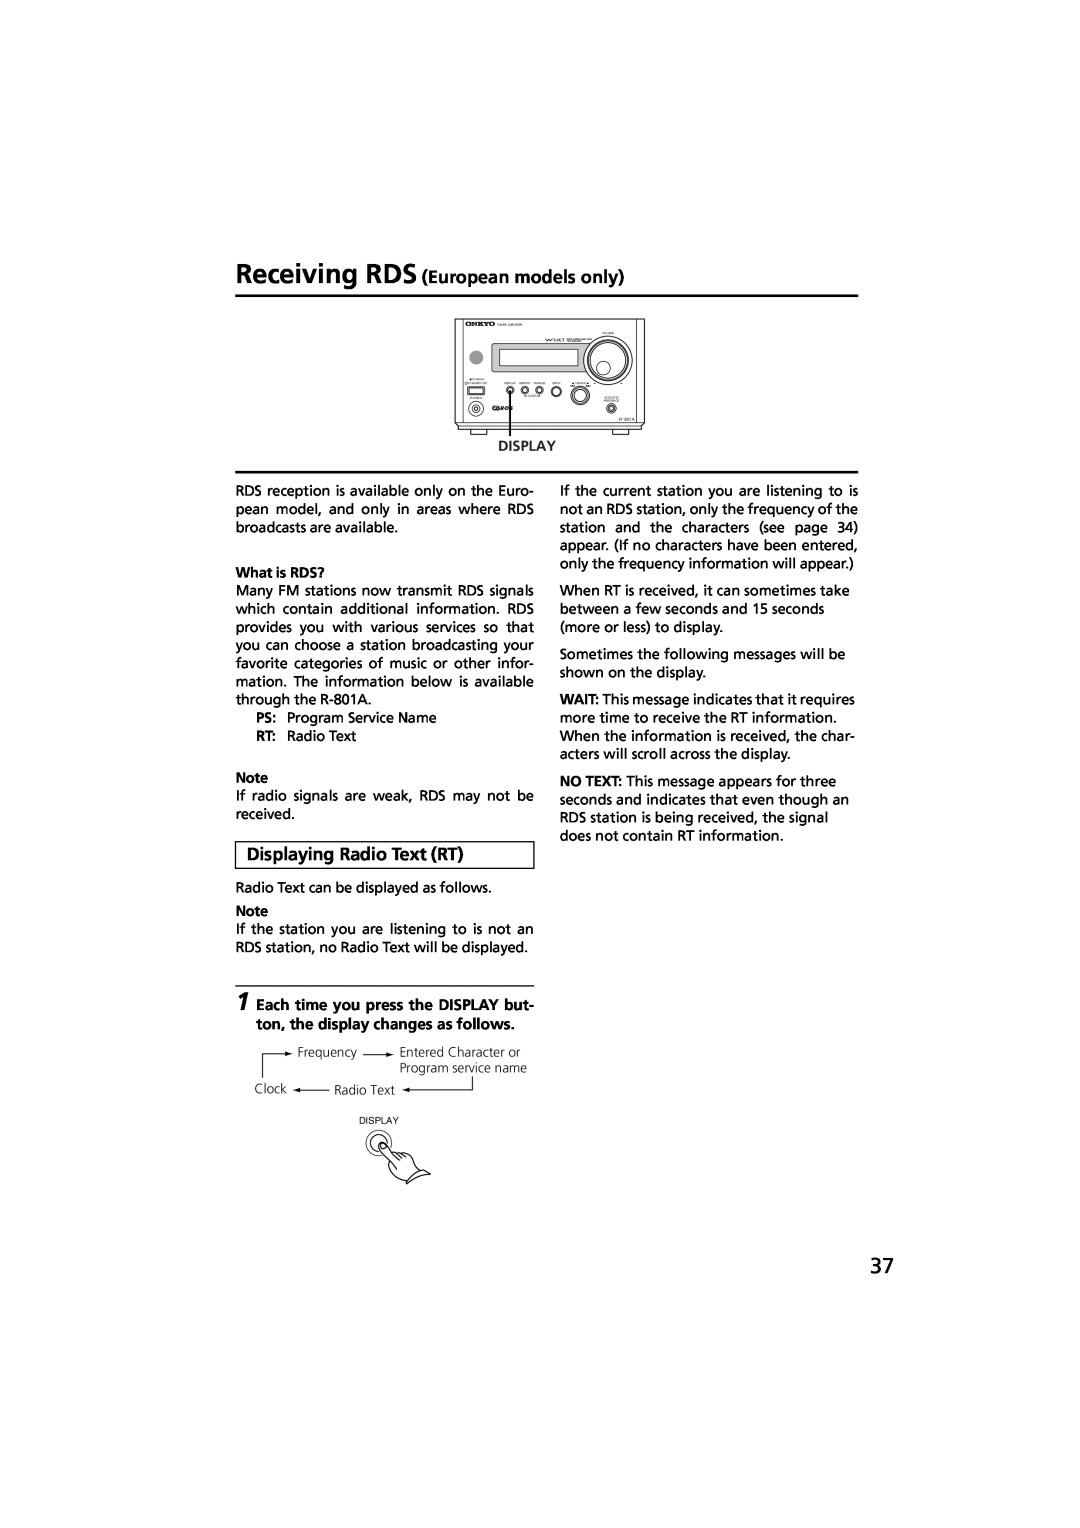 Onkyo R-801A instruction manual Receiving RDS European models only, Displaying Radio Text RT, What is RDS? 